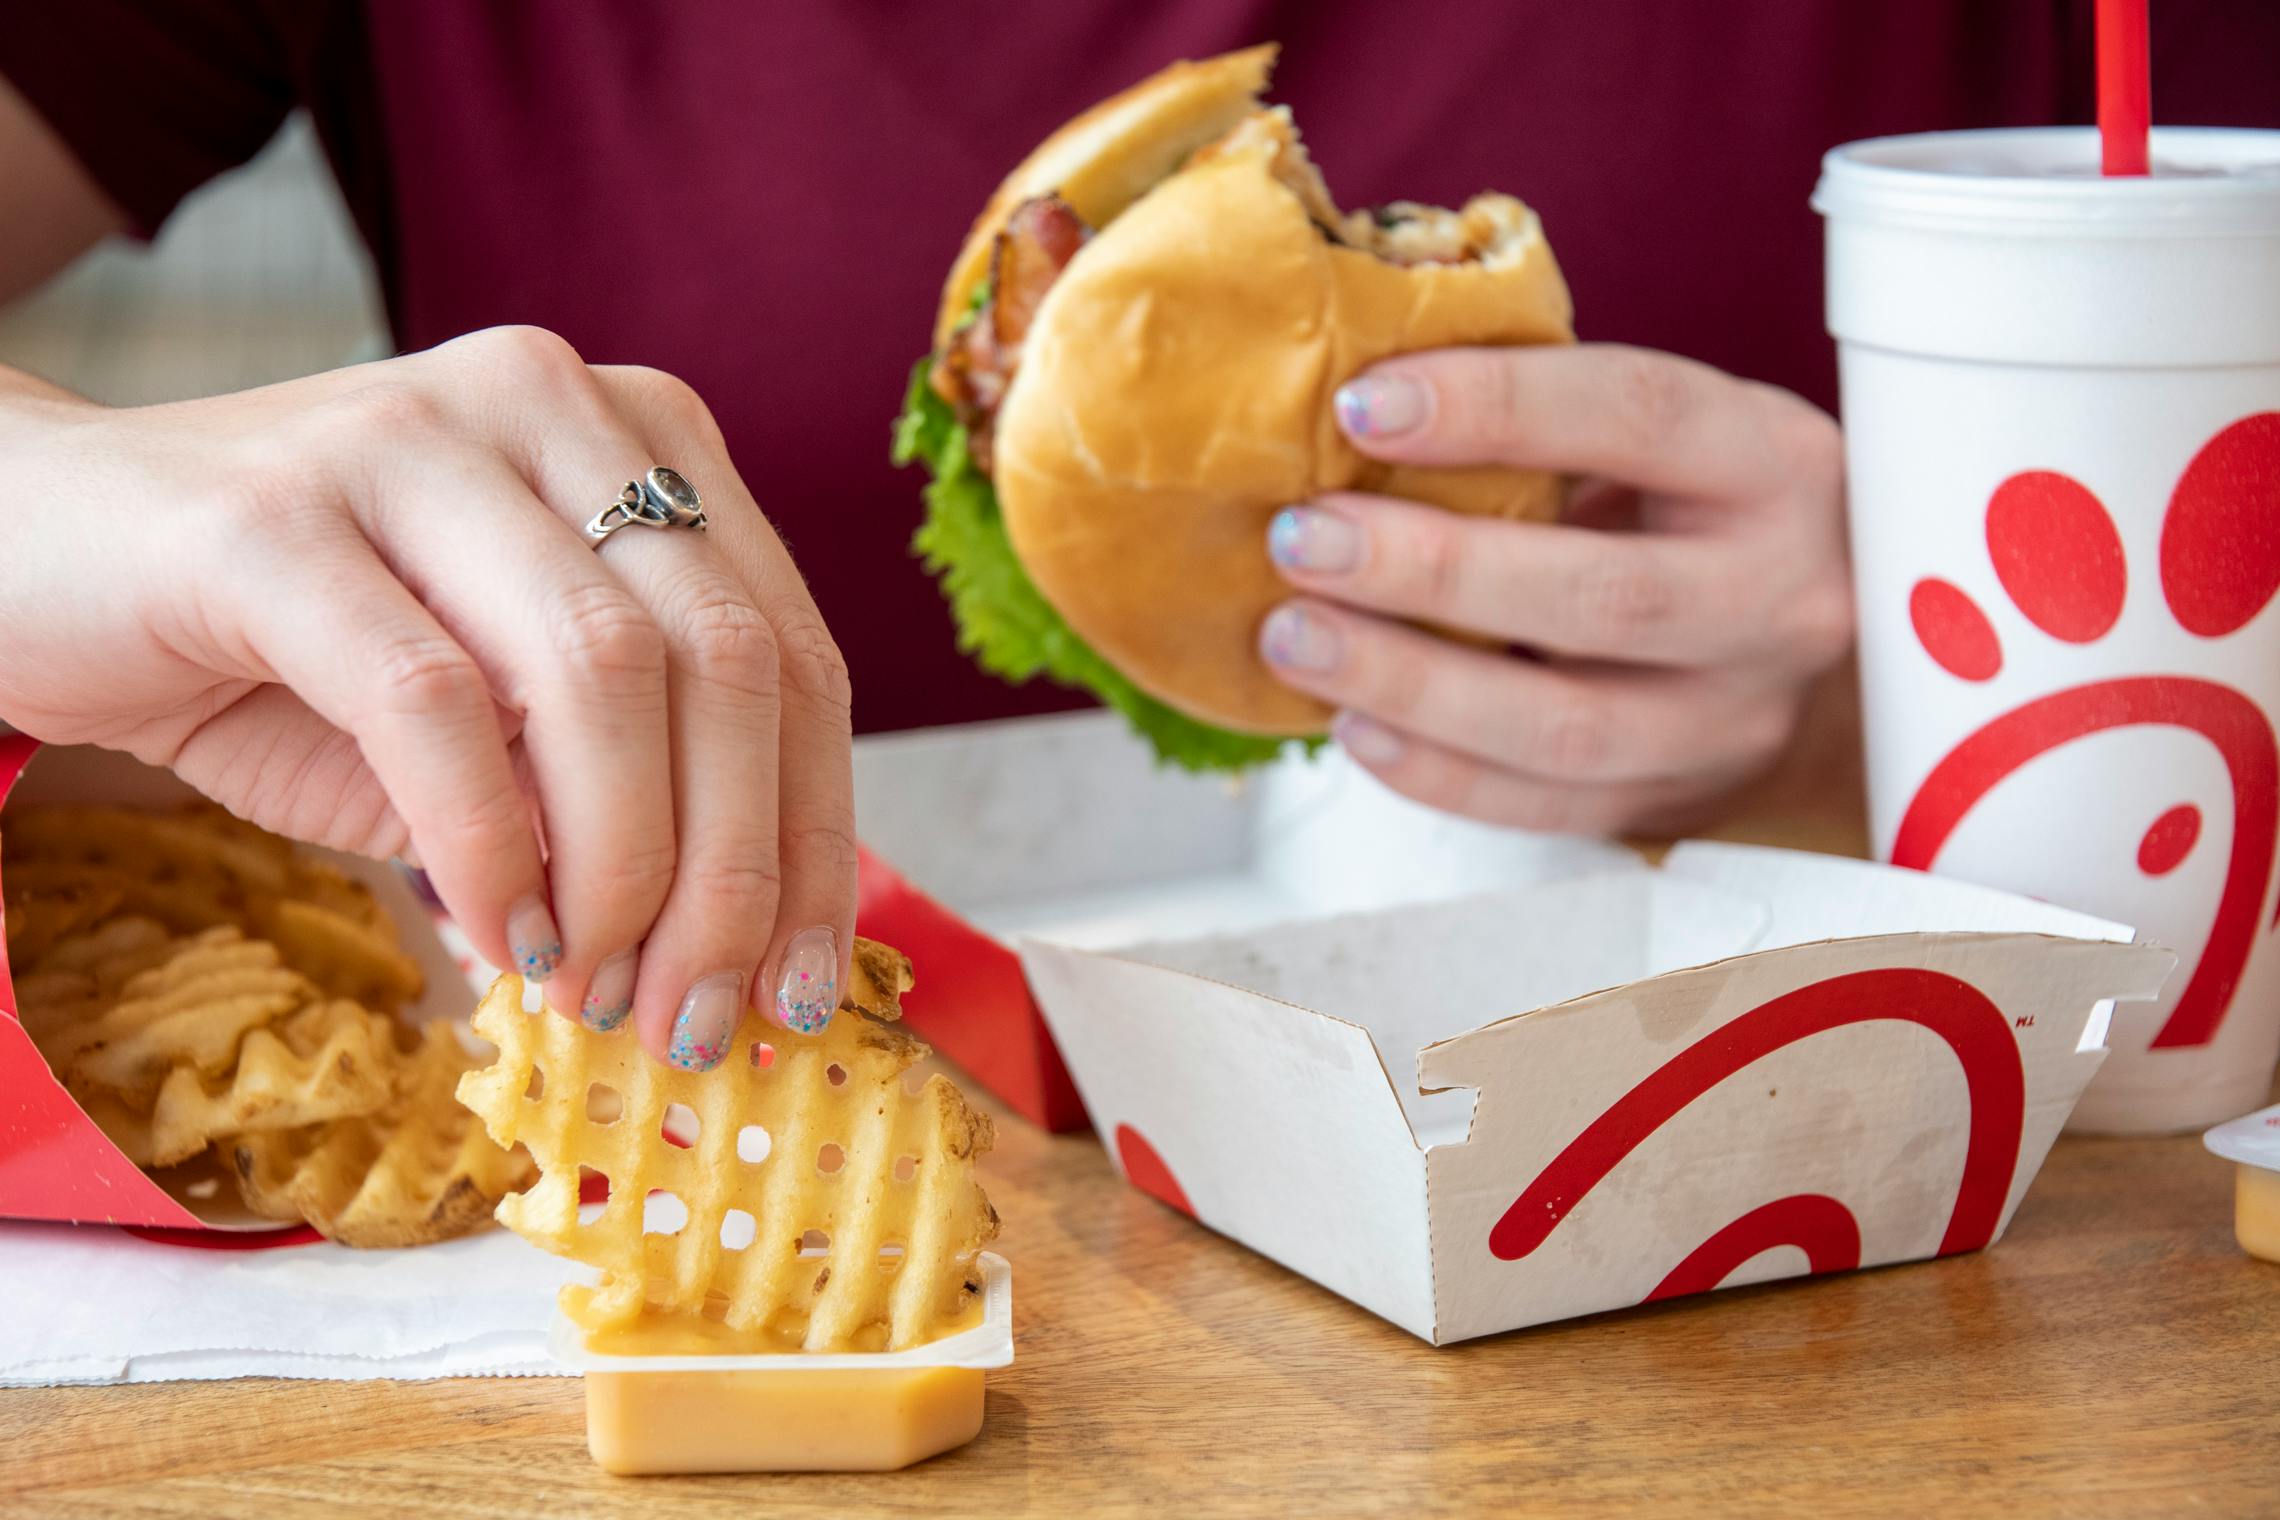 chick-fil-a vs. mcdonalds - A person eating a Chick-fil-A meal while sitting at a table.